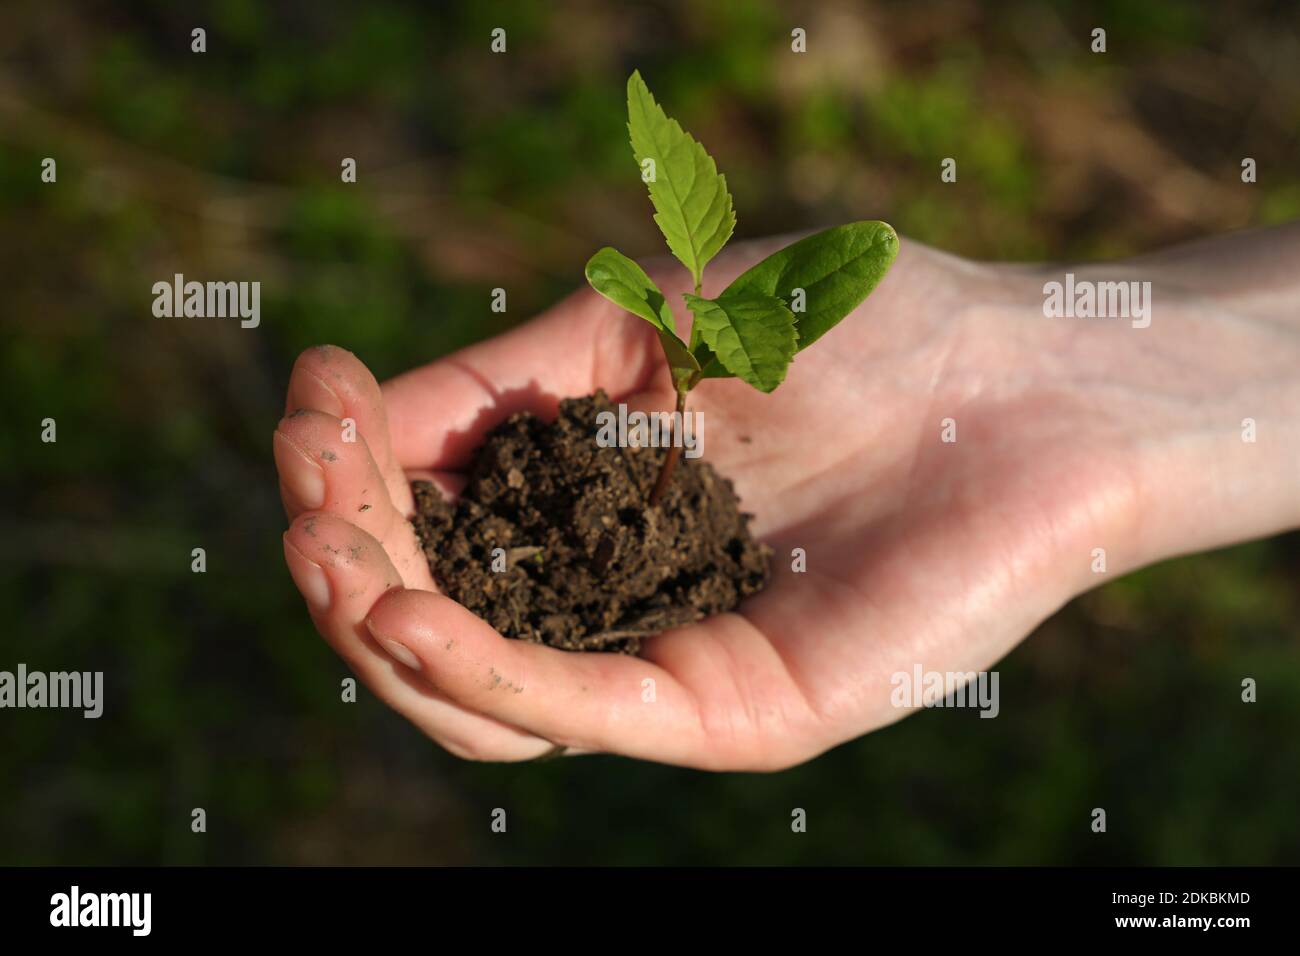 Cropped Hand Holding Plant With Soil Stock Photo